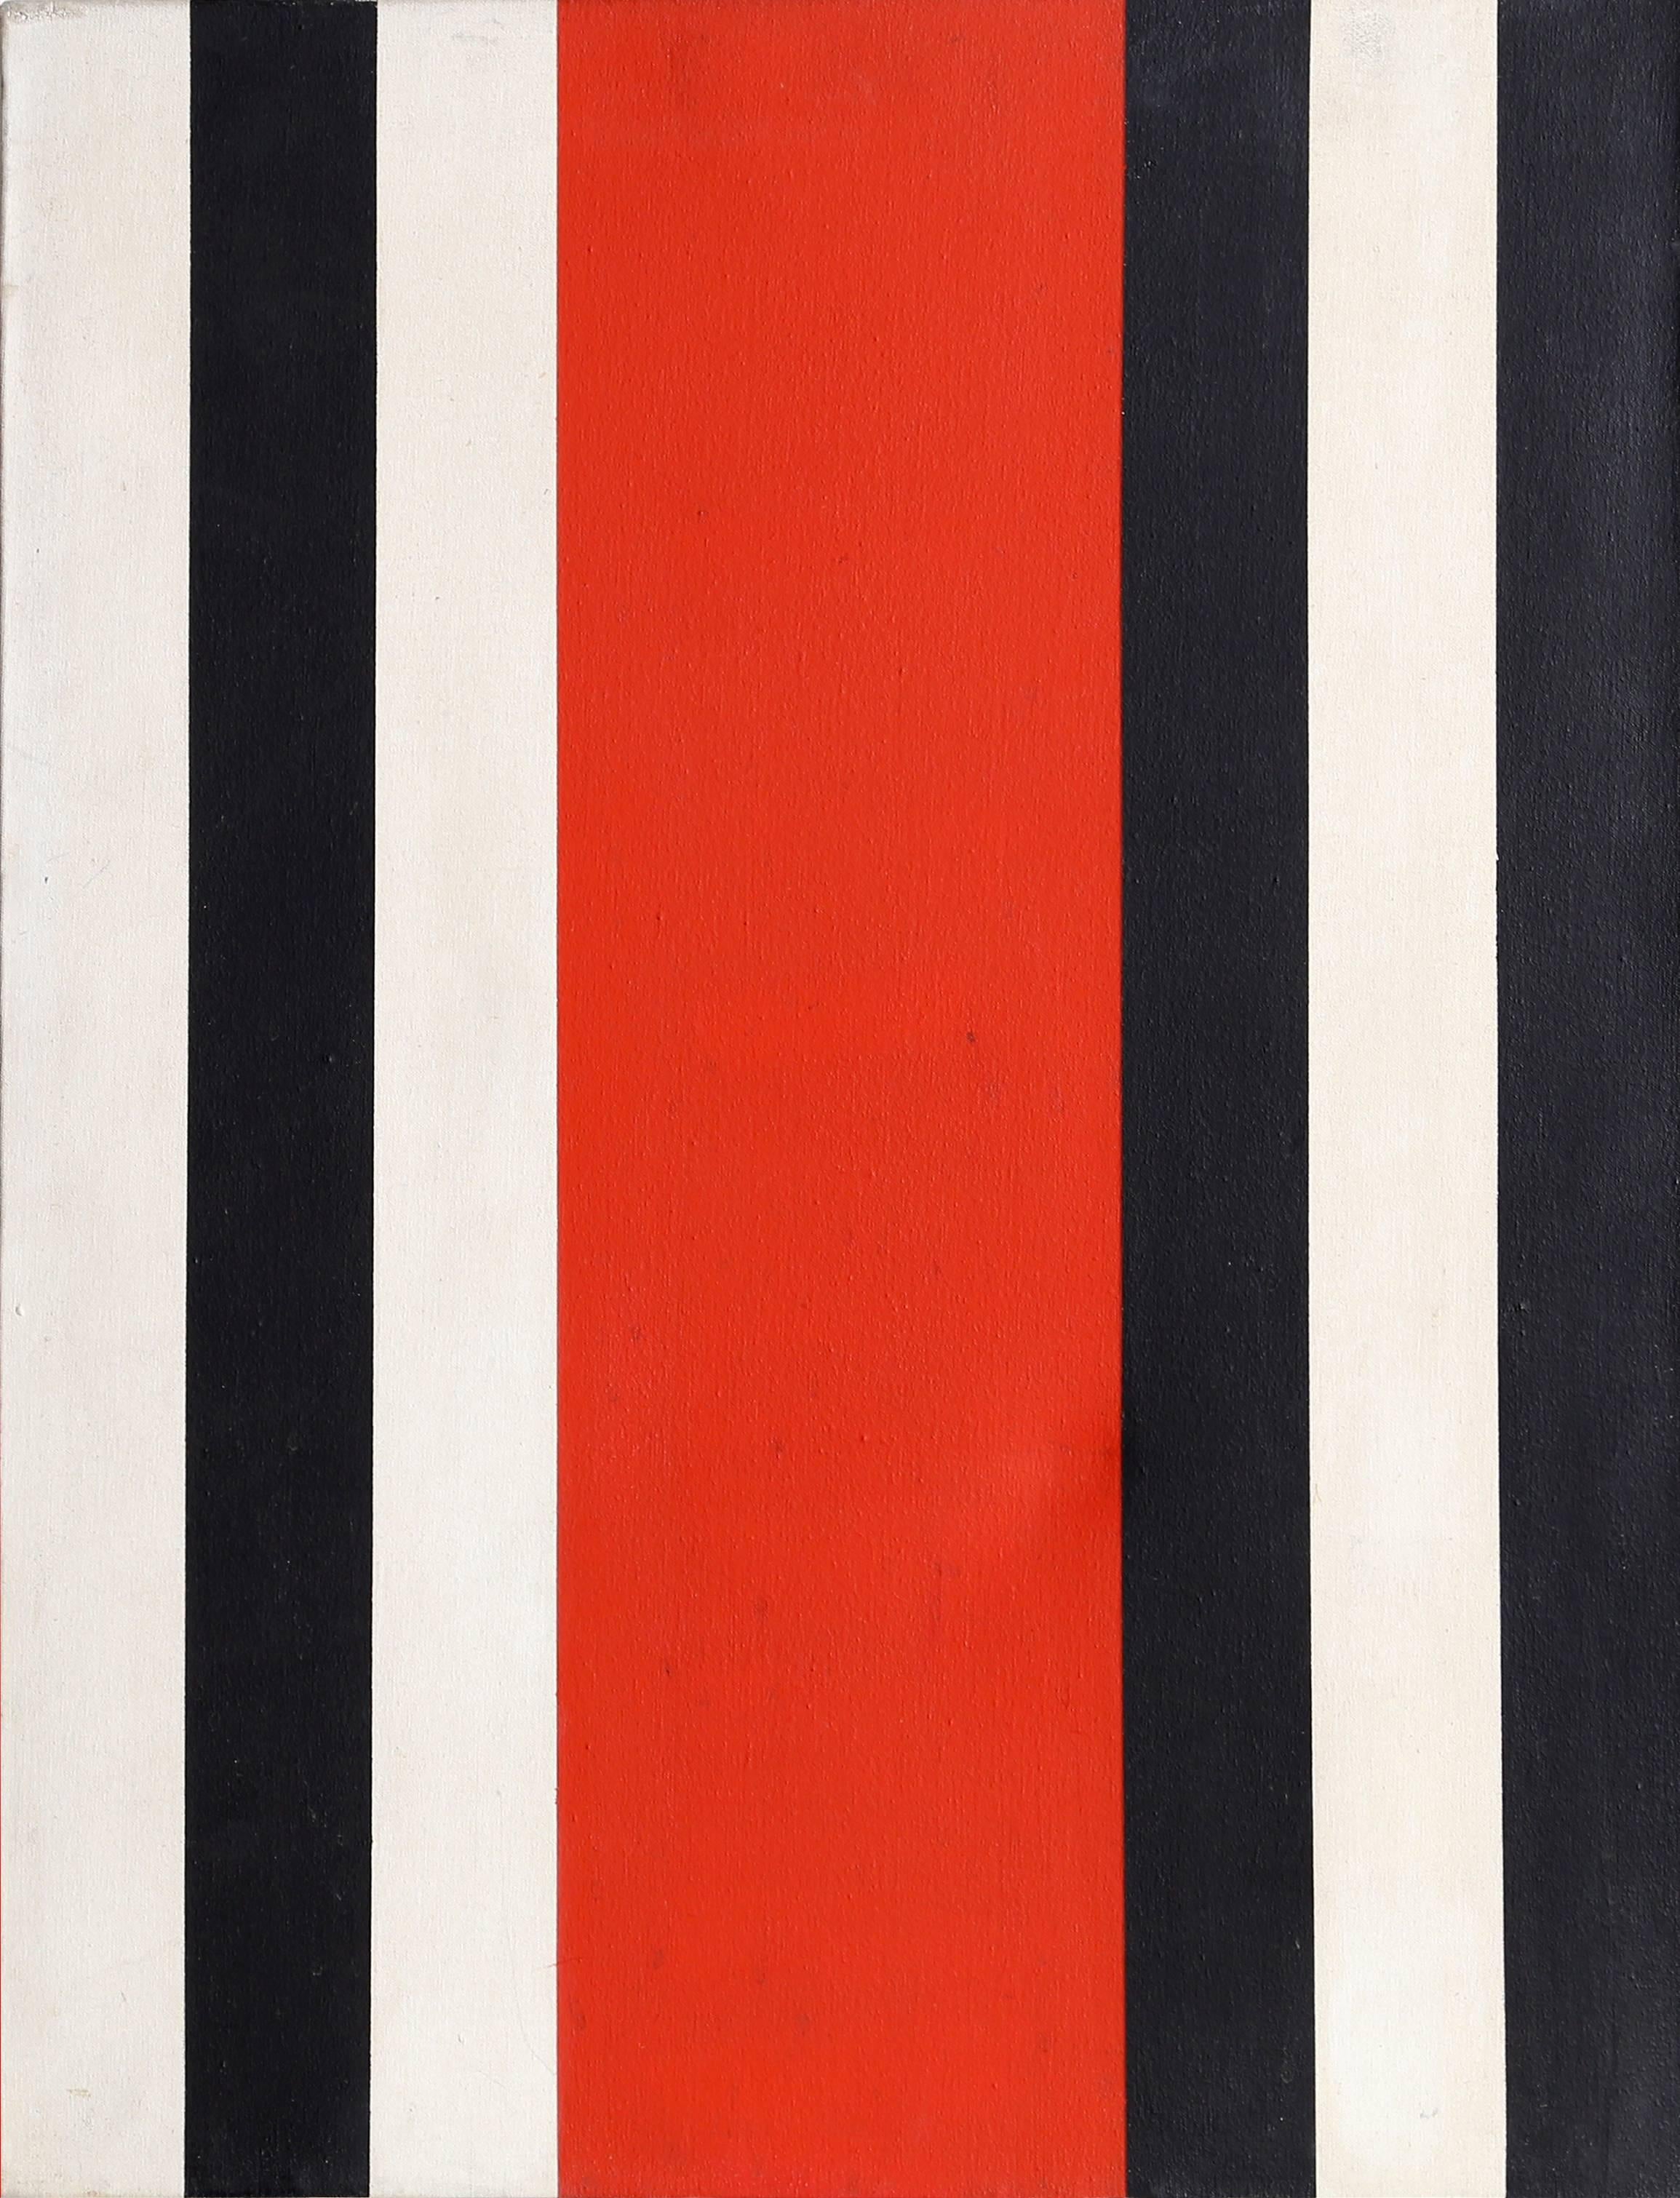 Artist: Warner Friedman, American (1935 -  )
Title:	Red, Black and White Stripes
Year: circa 1965
Medium:	Oil on Canvas, signed on label verso
Size: 28 in. x 21 in. (71.12 cm x 53.34 cm)